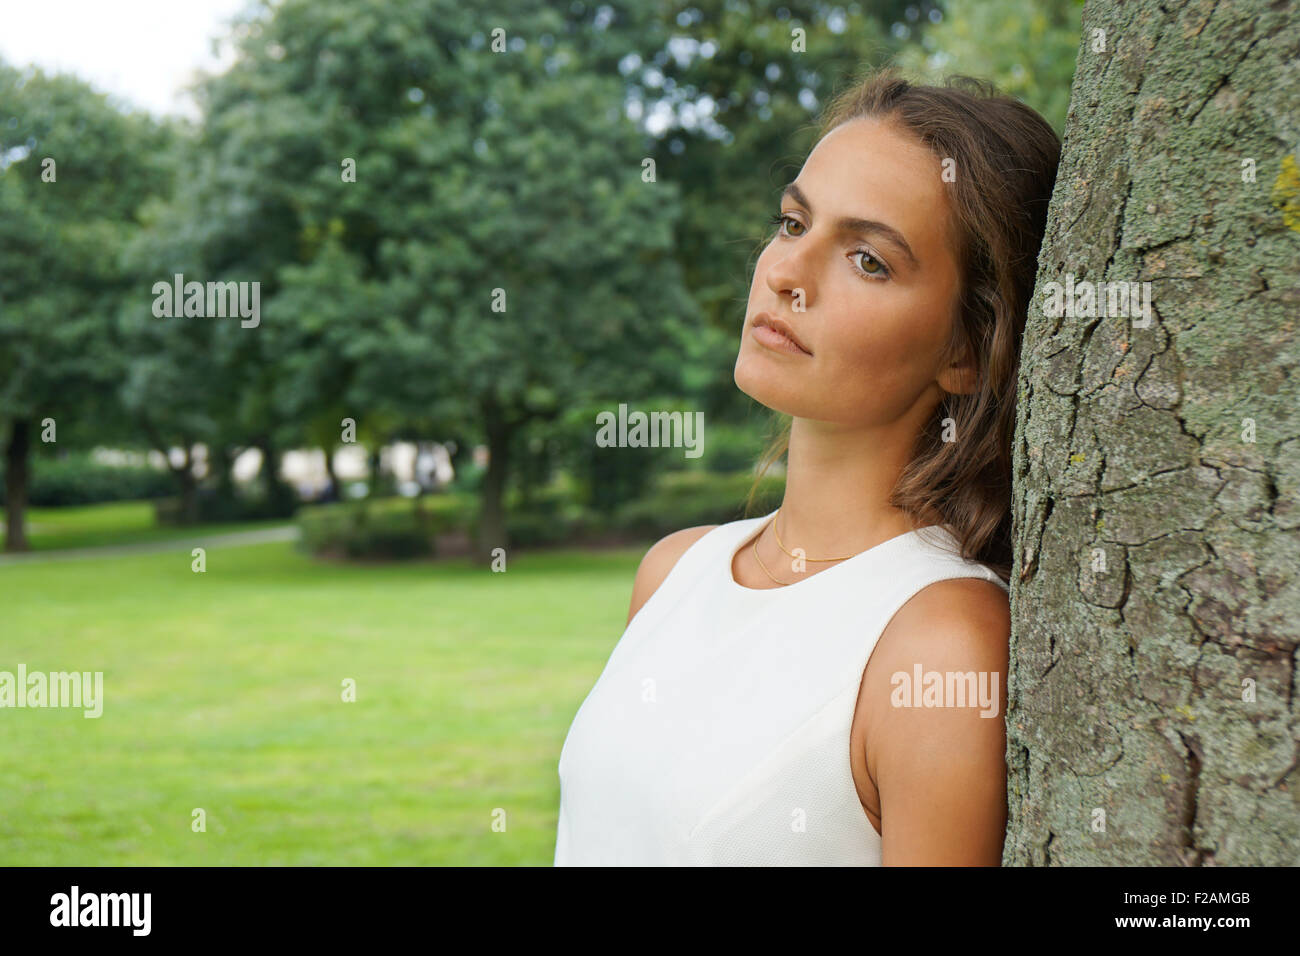 sad young woman leaning against tree Stock Photo